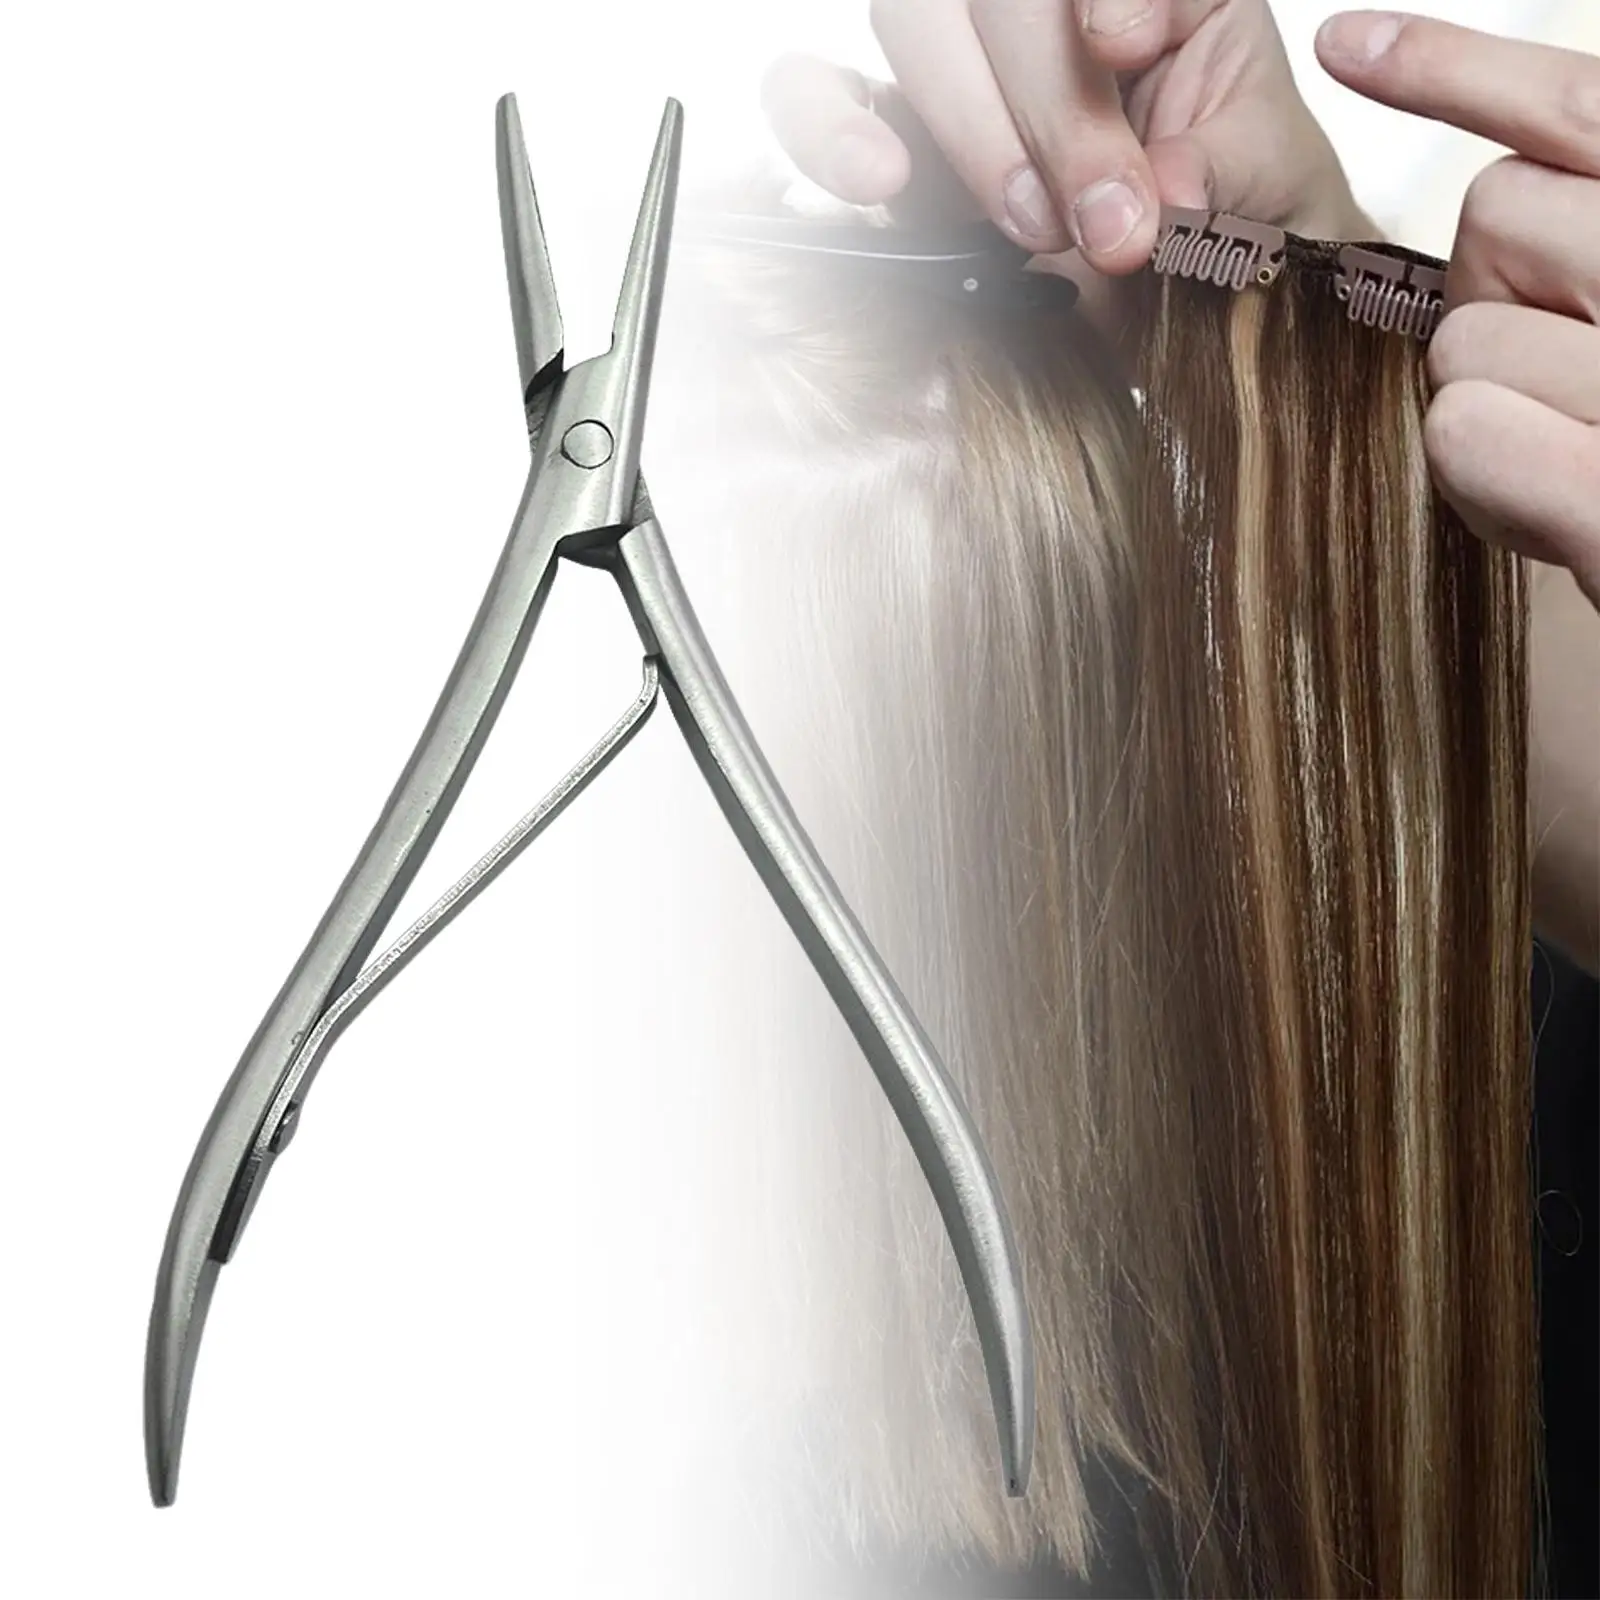 Hair Extension Pliers, Hair Extension Tools Flat Shape, Multi Functional Clamp Pliers Tool for Hair Extension